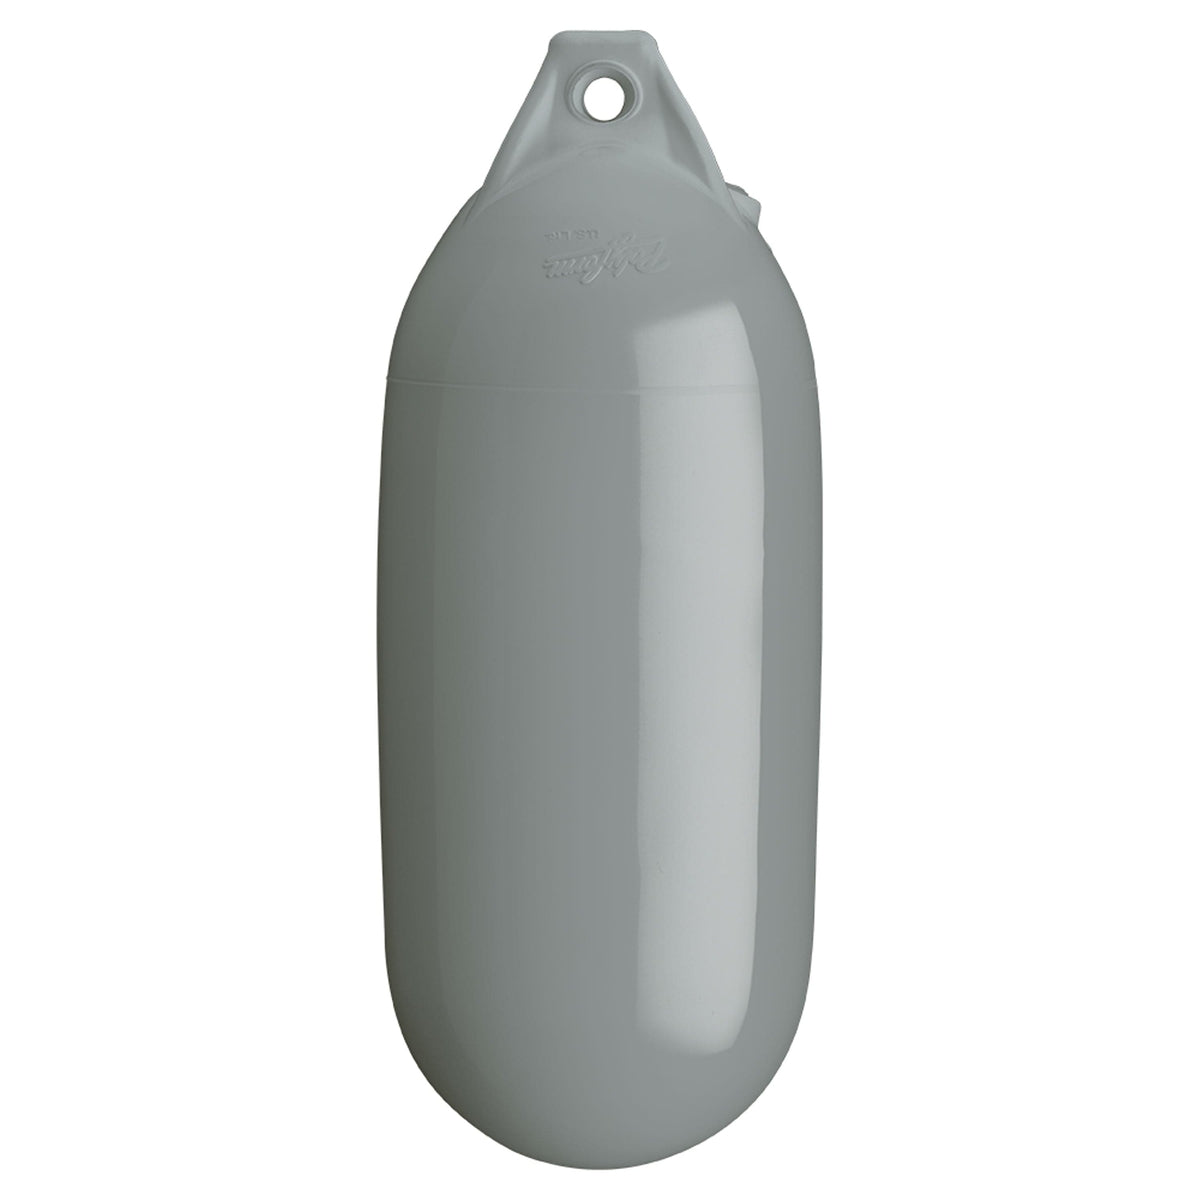 Polyform U.S. Qualifies for Free Shipping Polyform S-1 S-Series Buoy 6" x 15" Gray #S-1-GREY